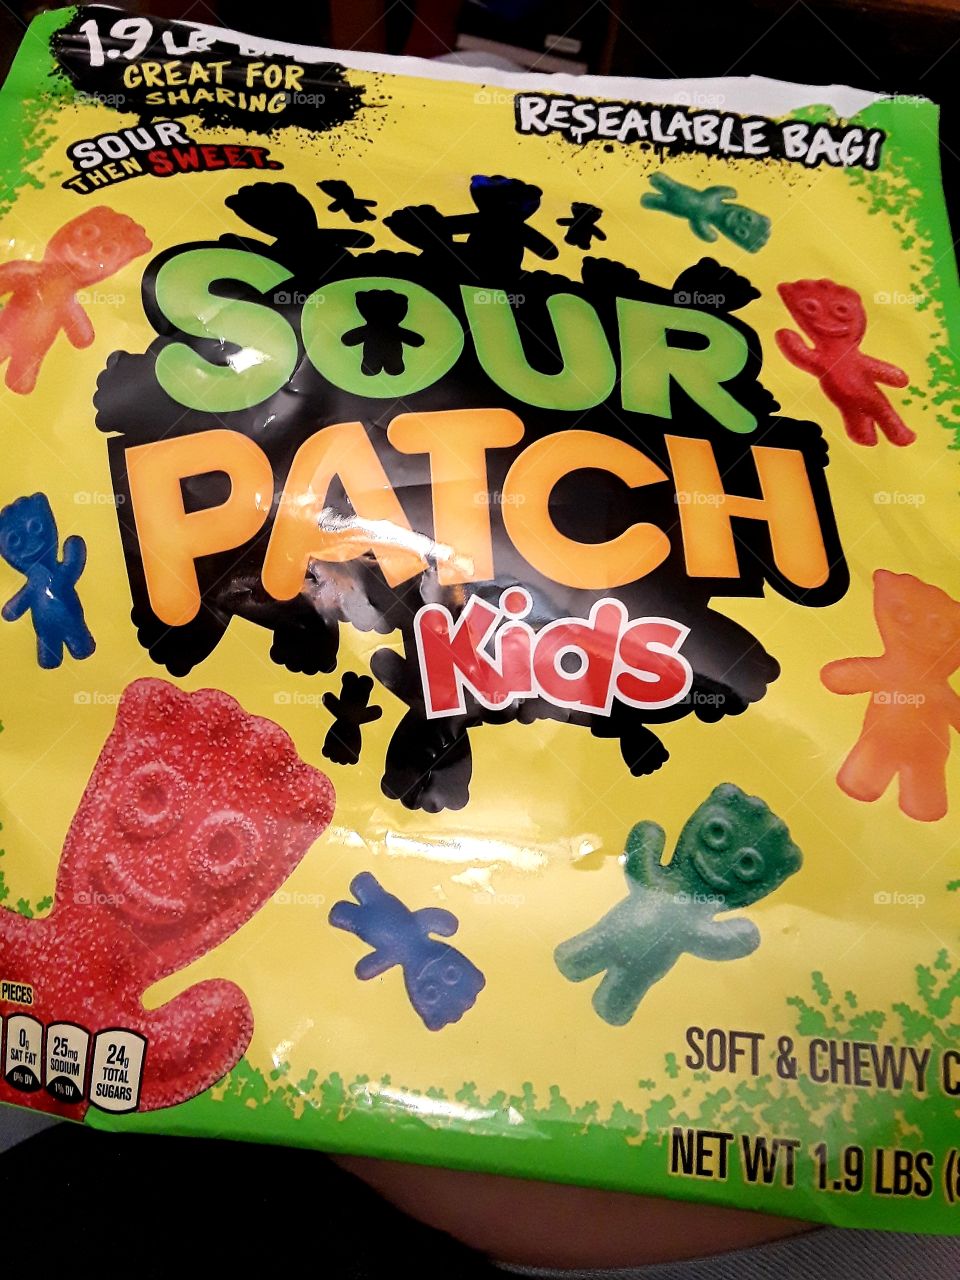 Who doesn't love a package of Sour Patch Kids?